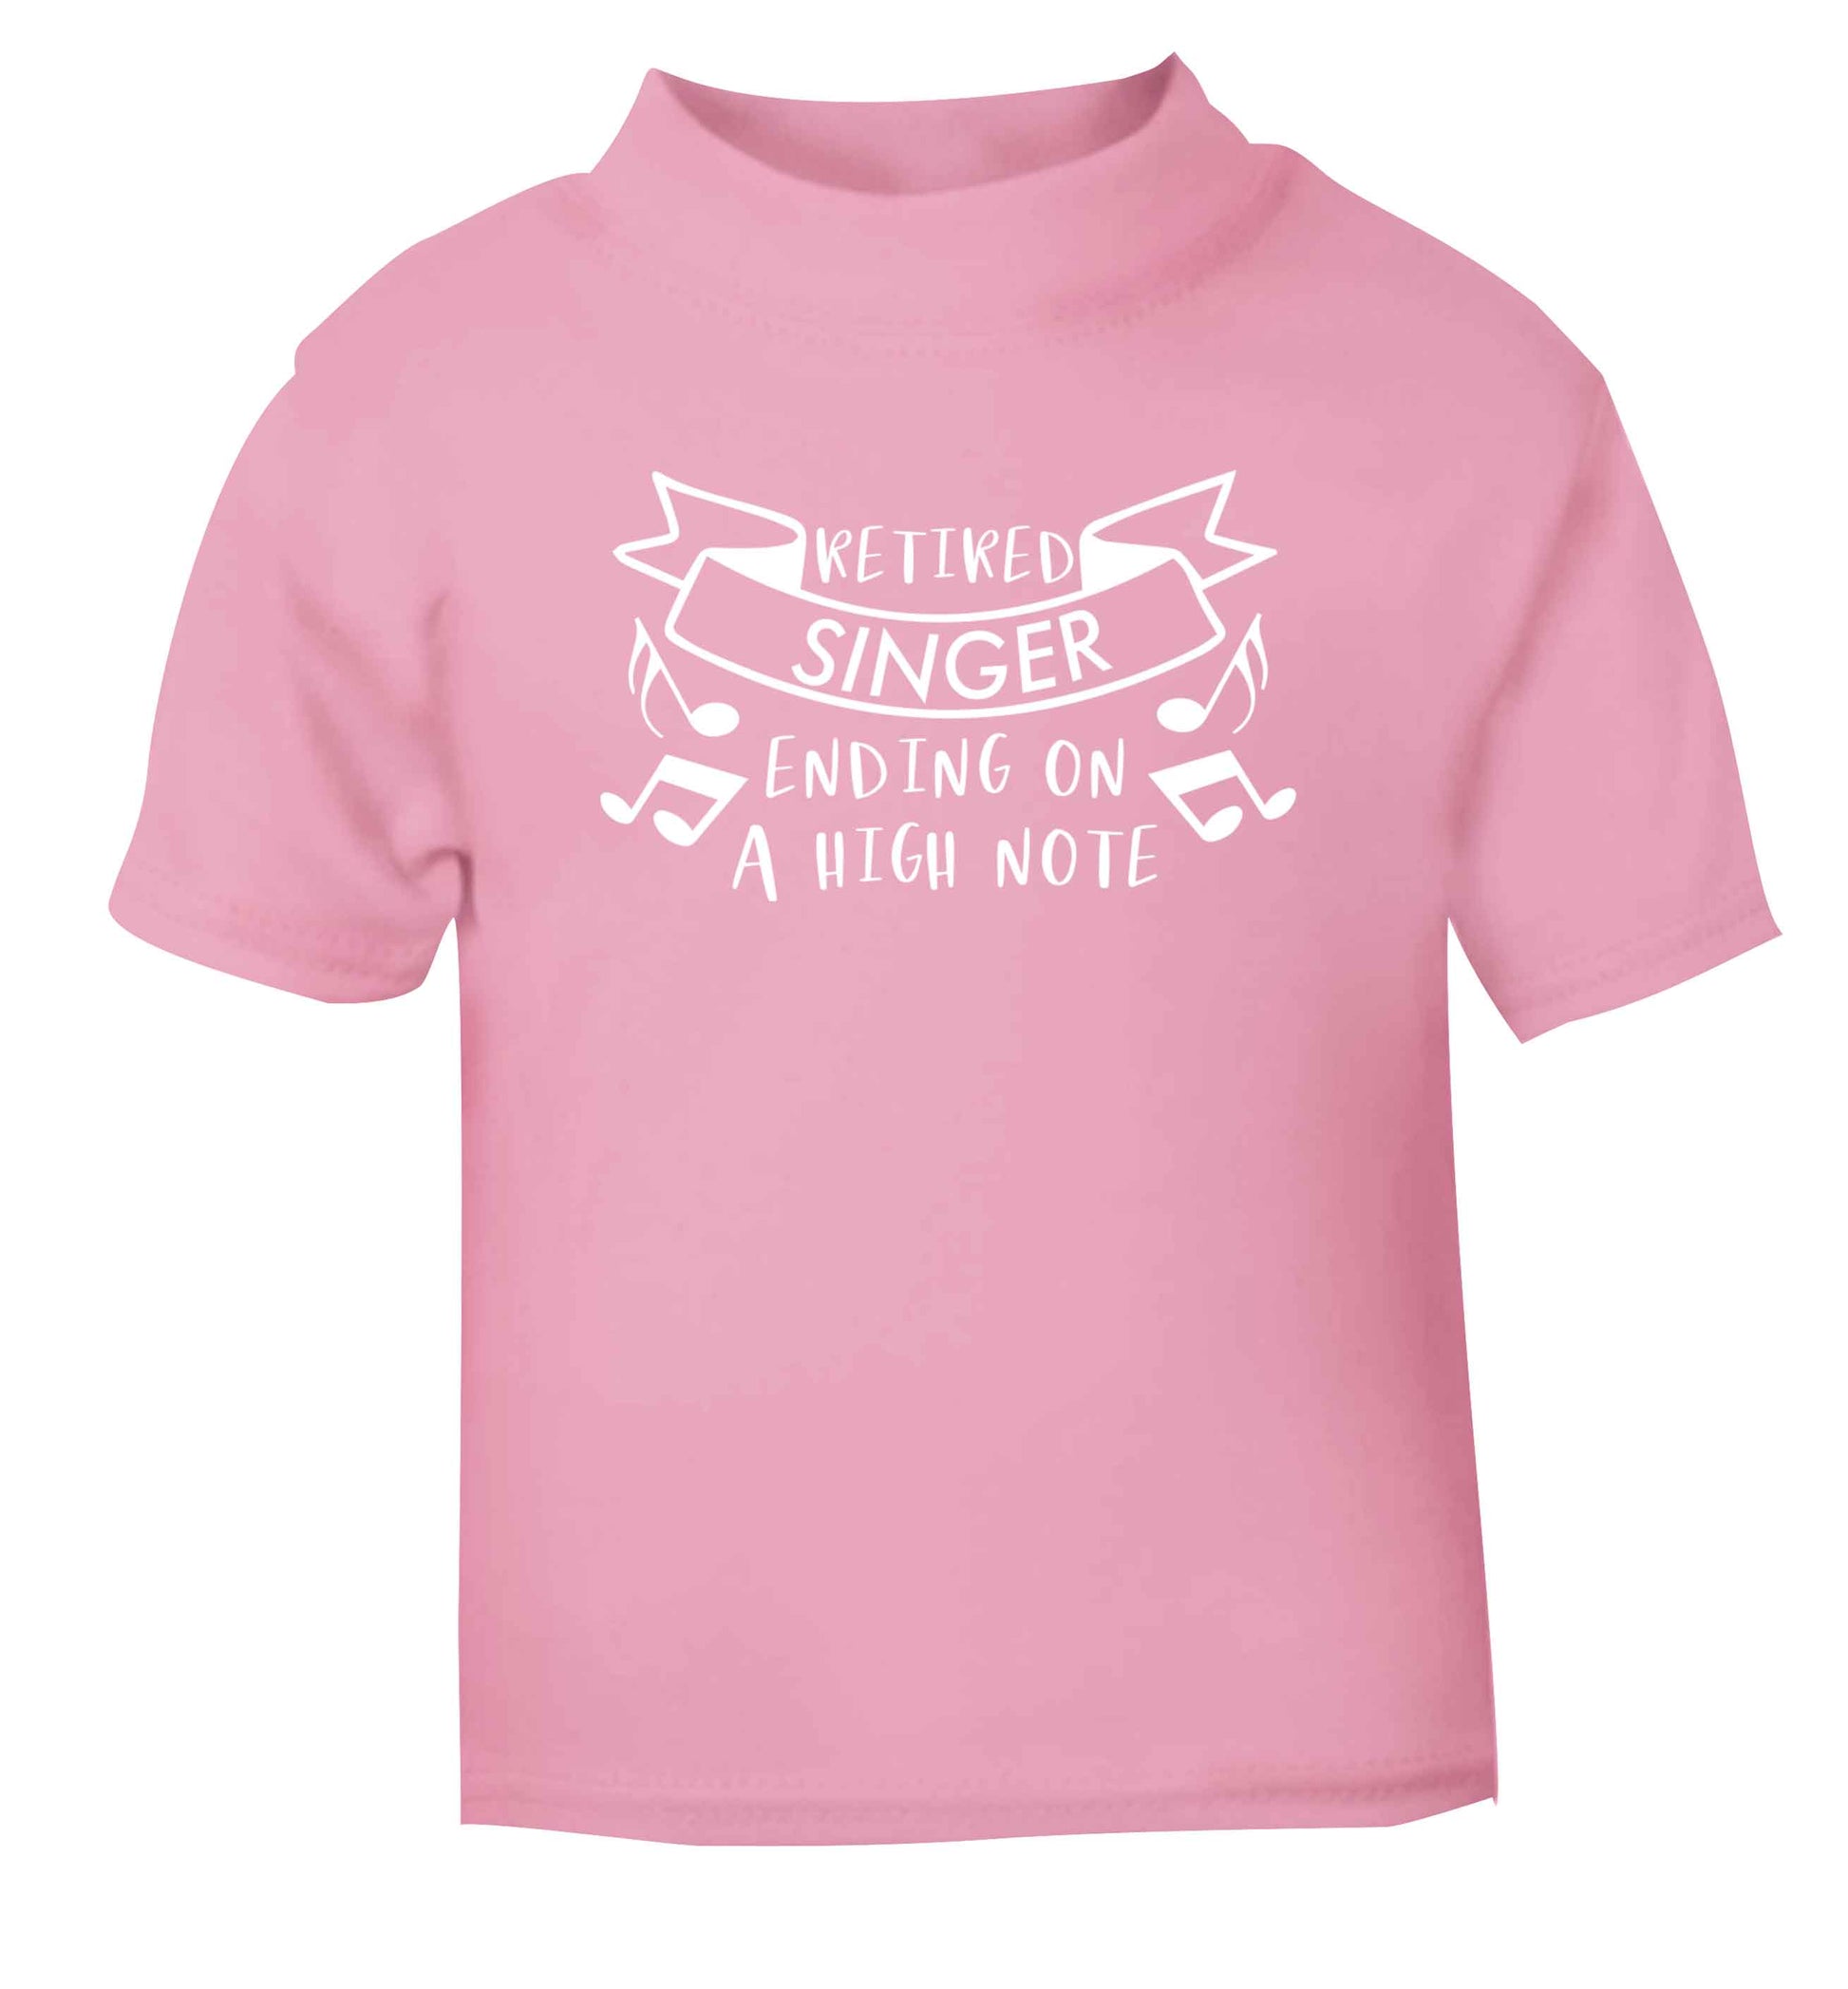 Retired singer ending on a high note light pink Baby Toddler Tshirt 2 Years